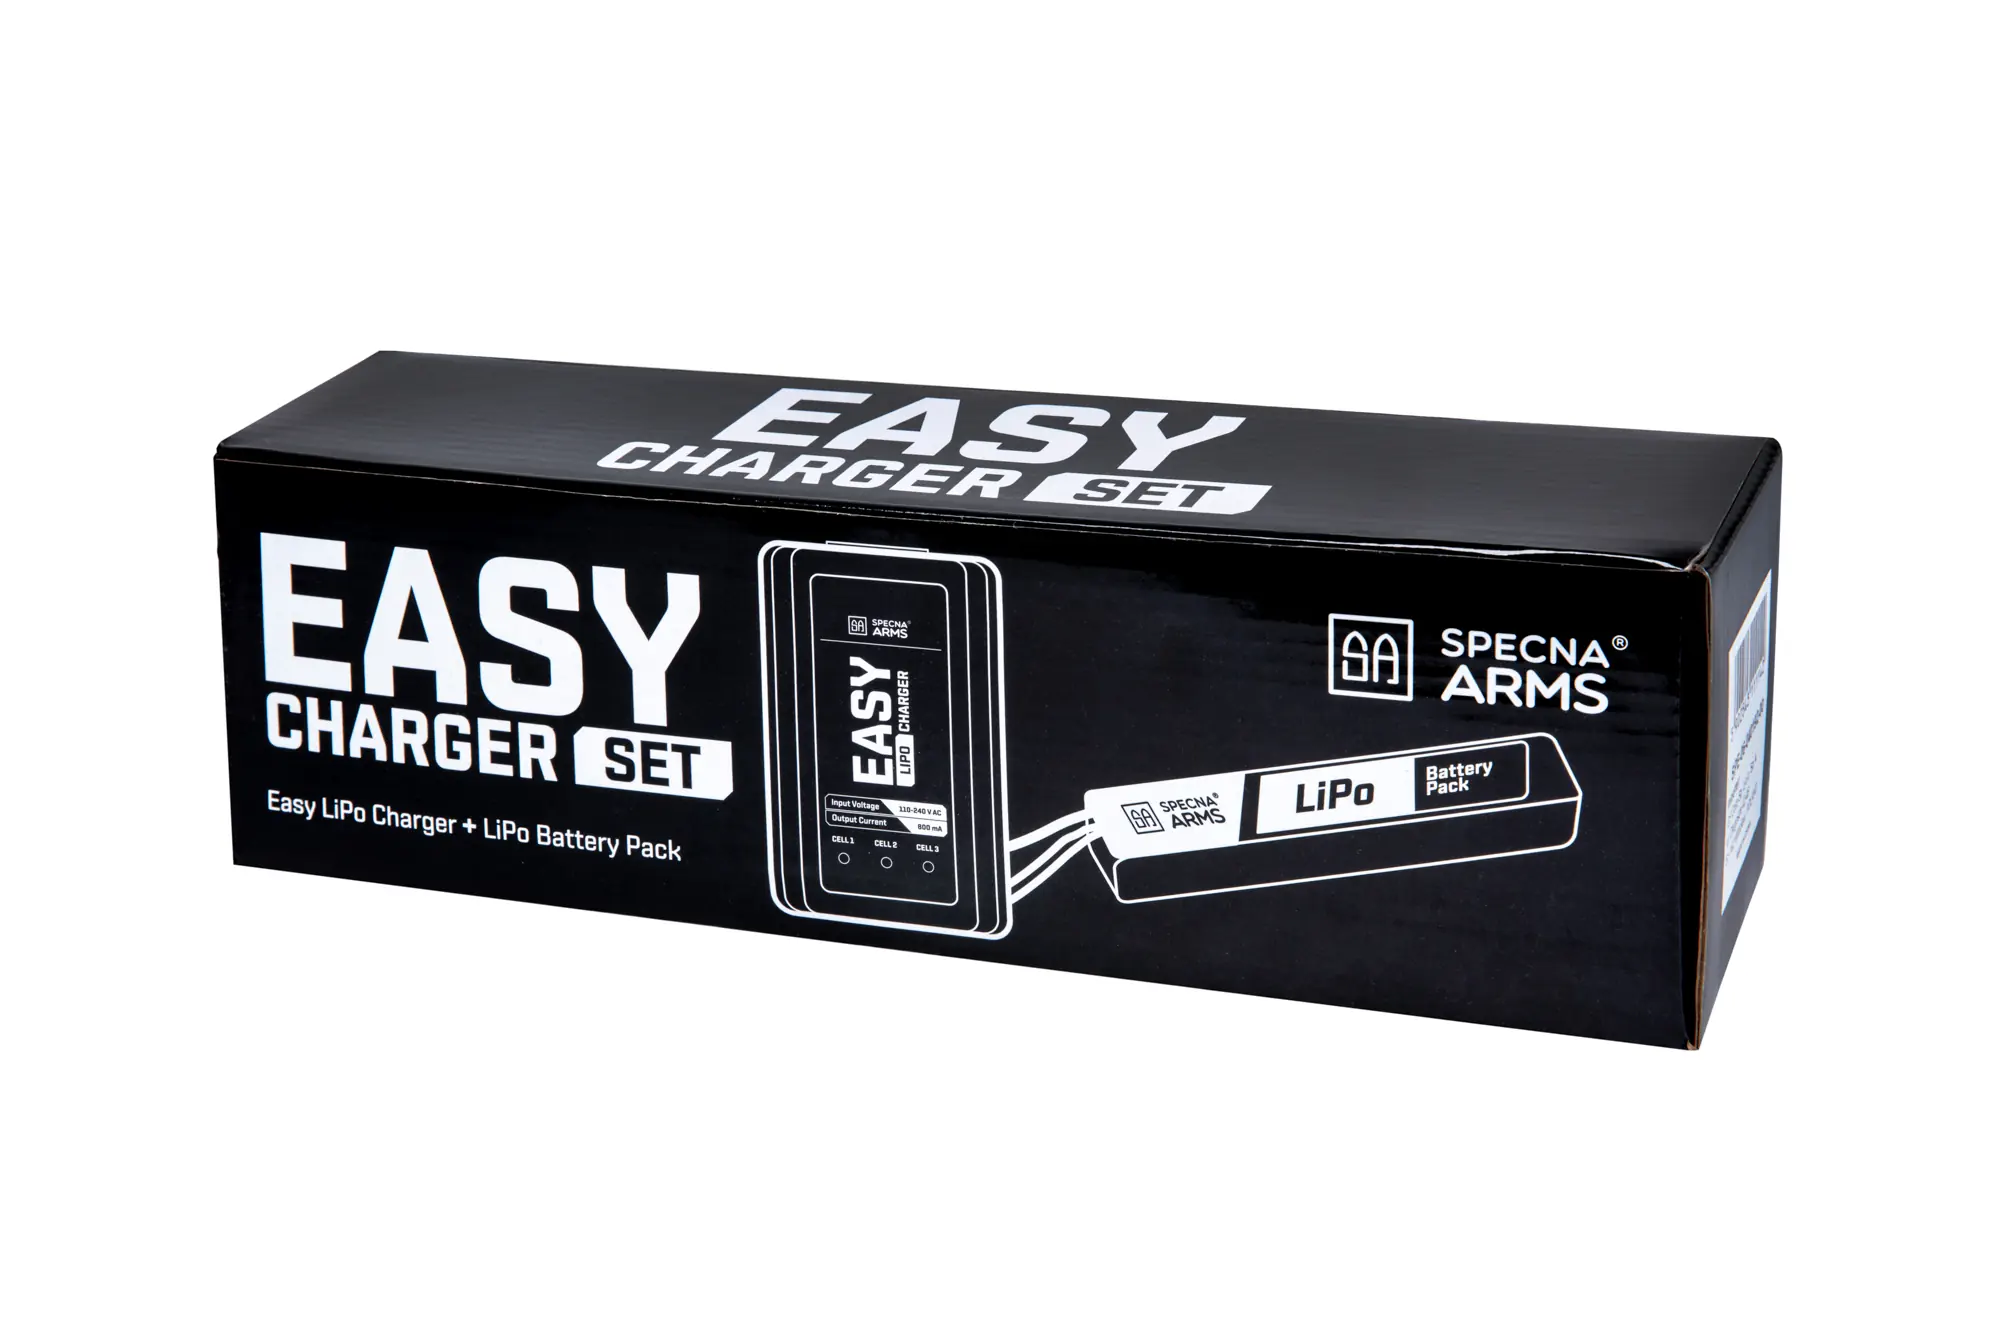 Specna Arms Easy Charger